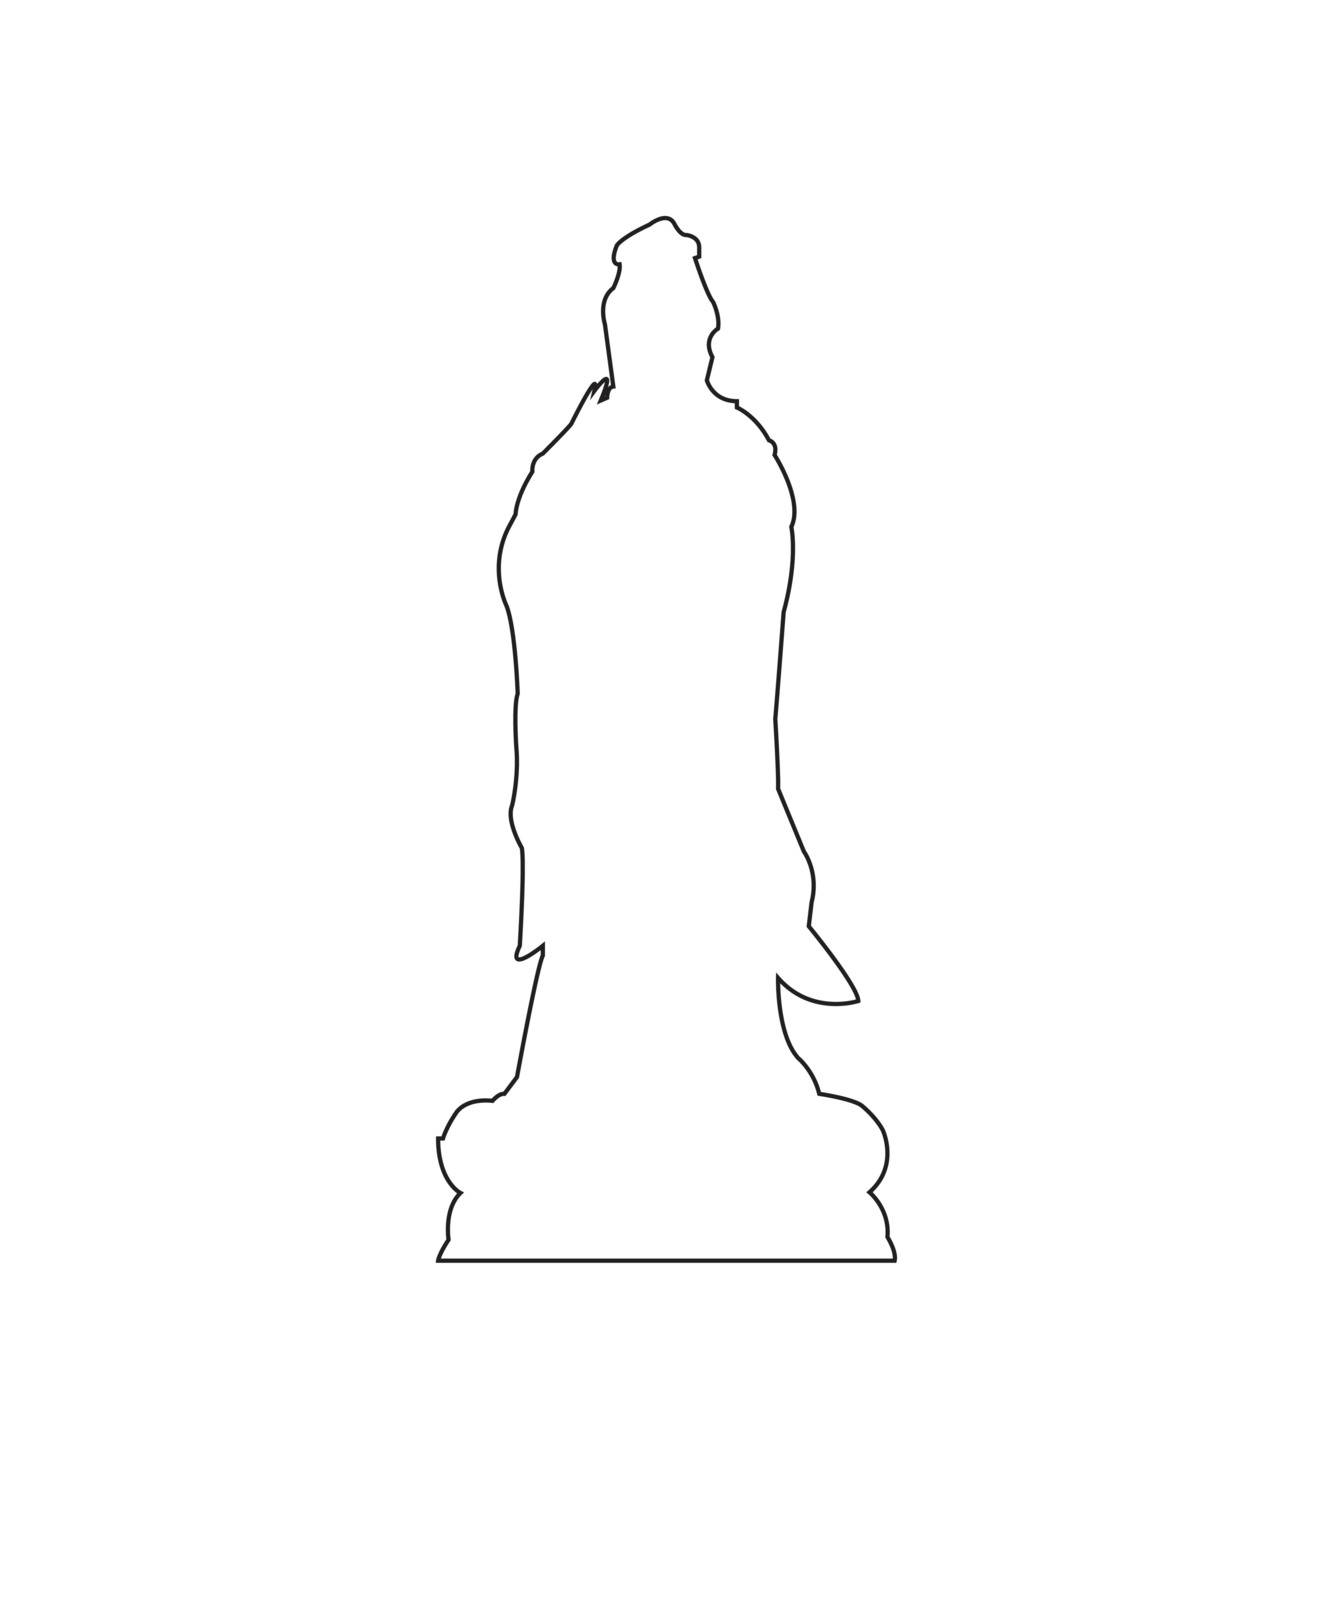 Guanyin Statue Path on the white background